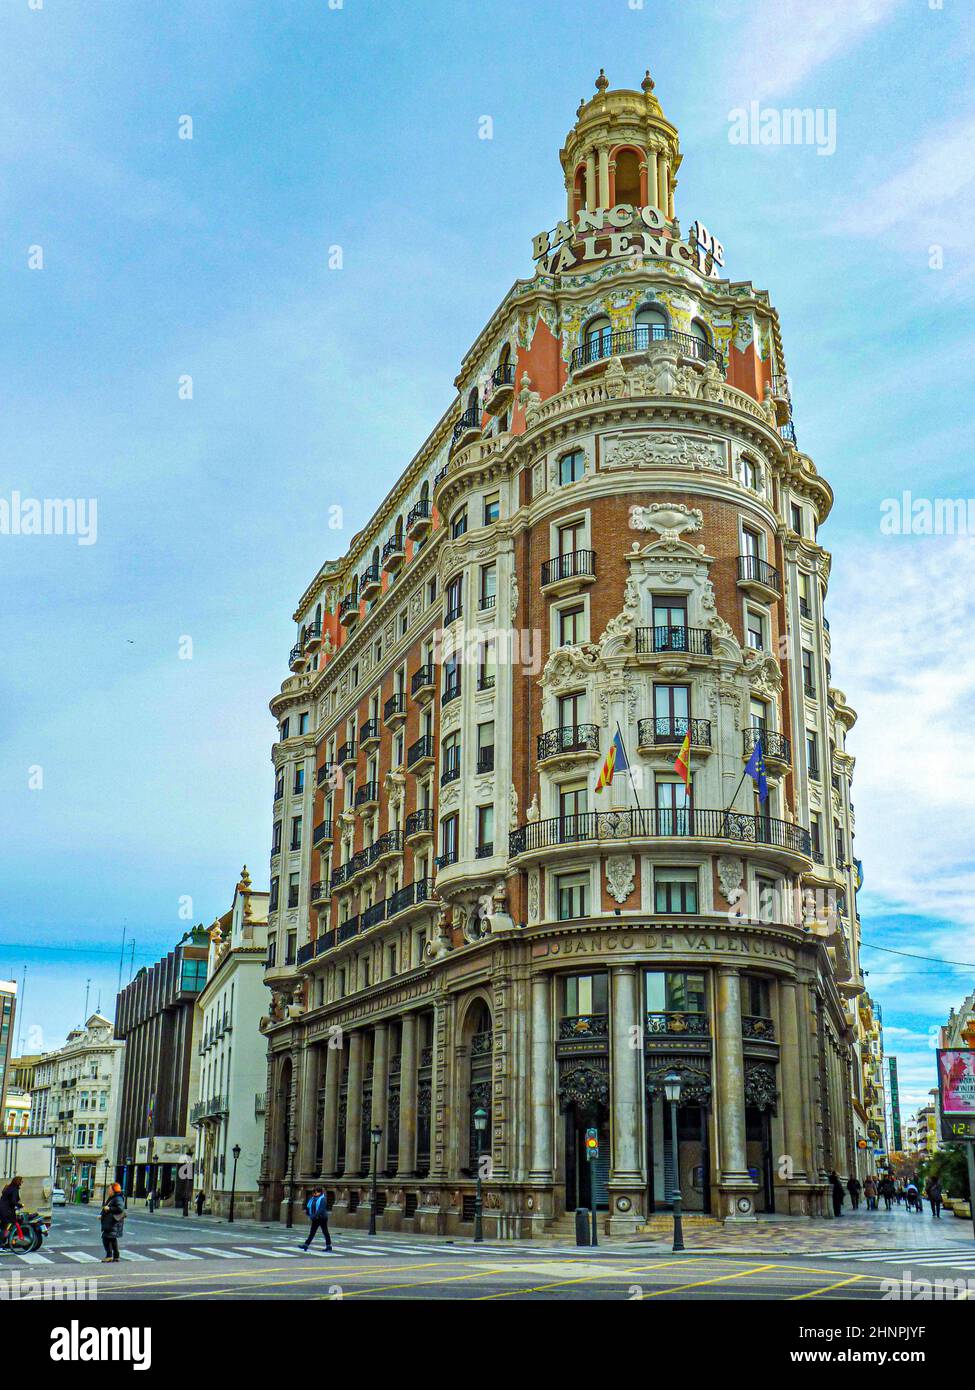 view of the stunning exterior of the headquarters of the Banco de Valencia, or Bank of Valencia, in the historic city of Valencia Stock Photo